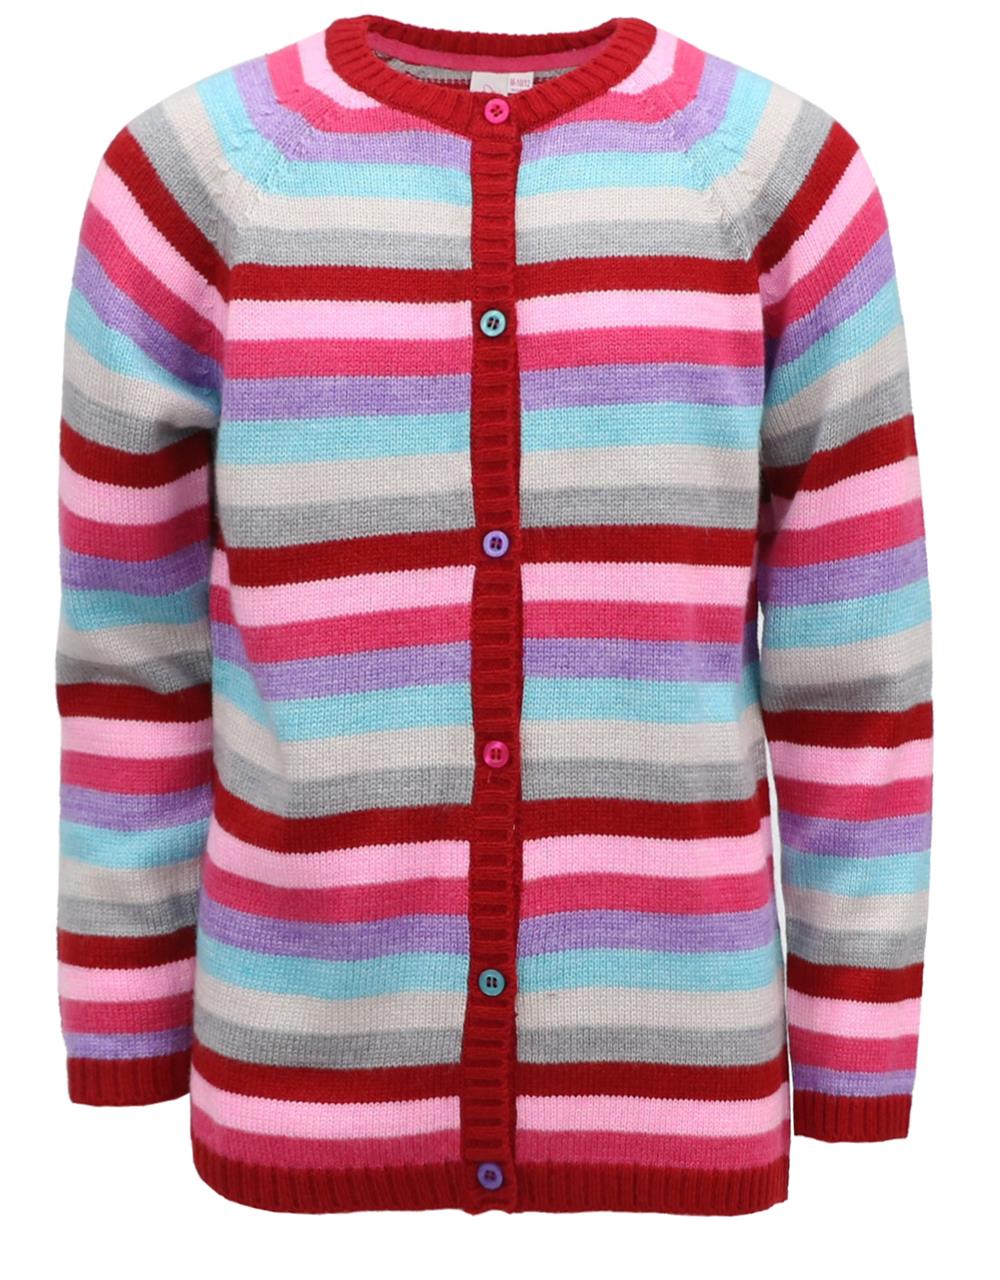 Cyndeelee Girls 2-16 Button Up Color Block Stripe Sweater Cardigan